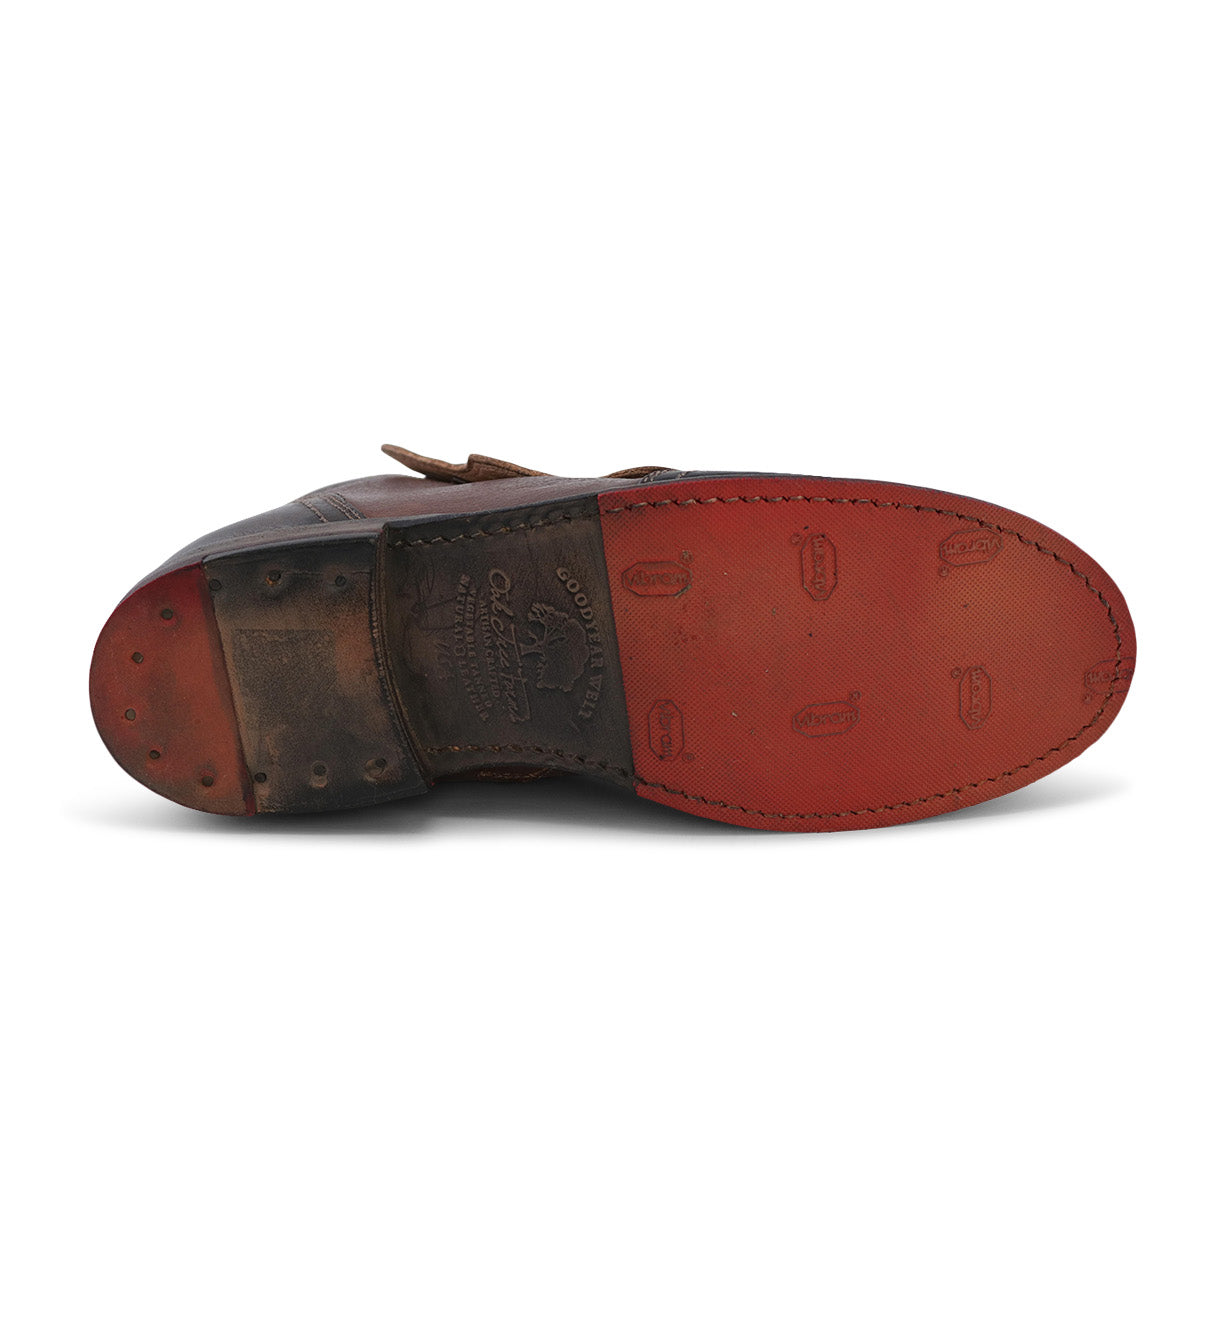 A pair of Oak Tree Farms Josephine brown leather shoes with red soles.